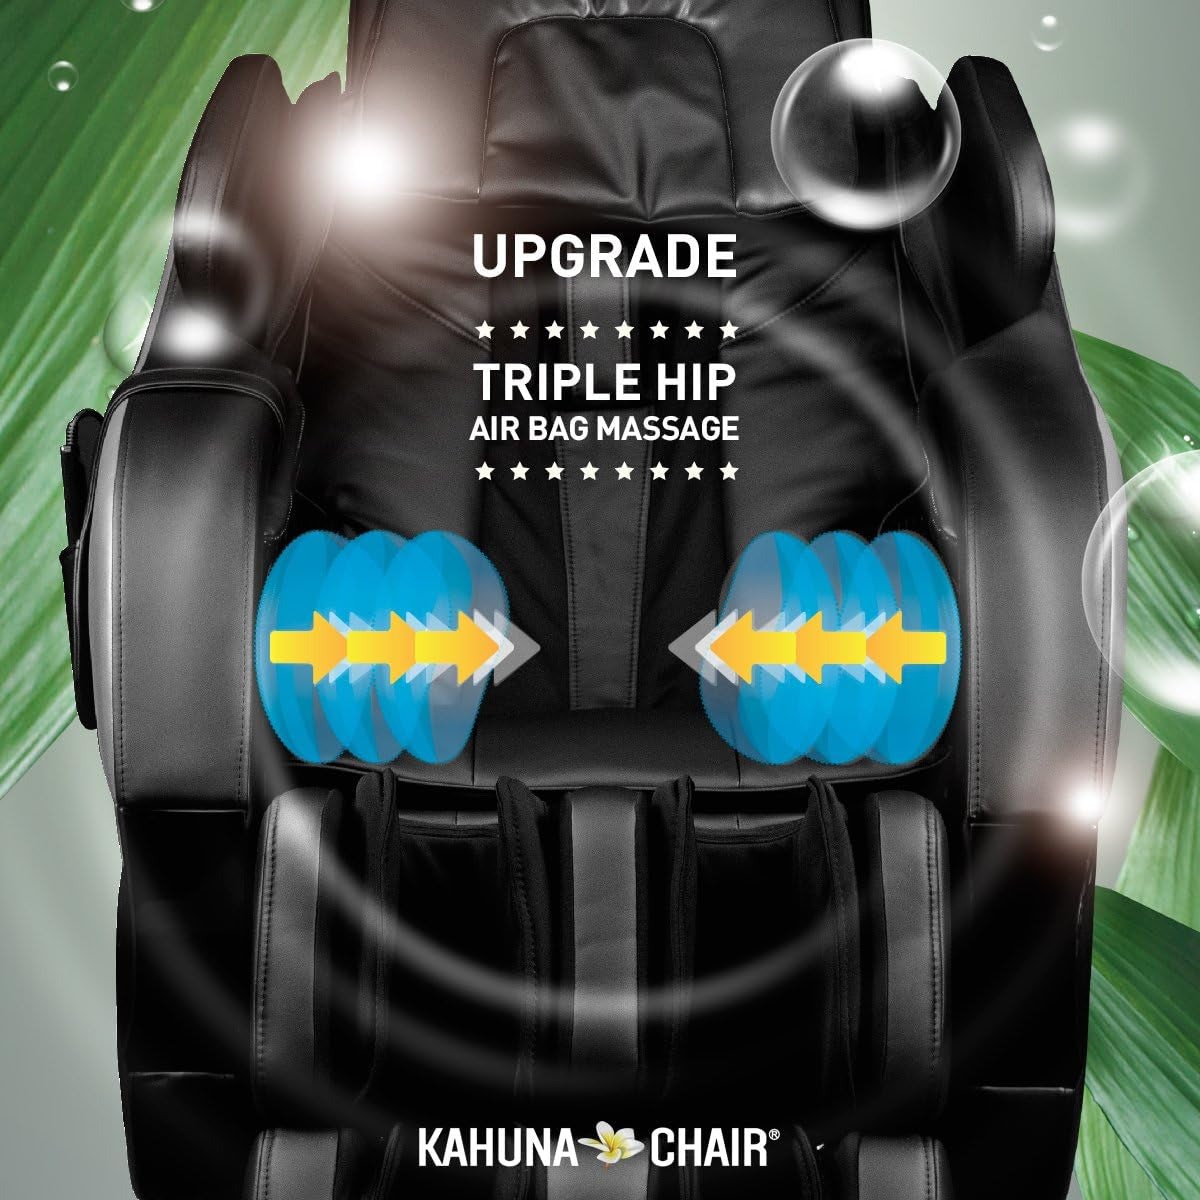 Kahuna Superior Massage Chair with Sl-Track Rollers - Sm-7300(Black) - Top Performance with Sl-Track 6 Rollers for the Best Relaxing Massage Chairs Experience.